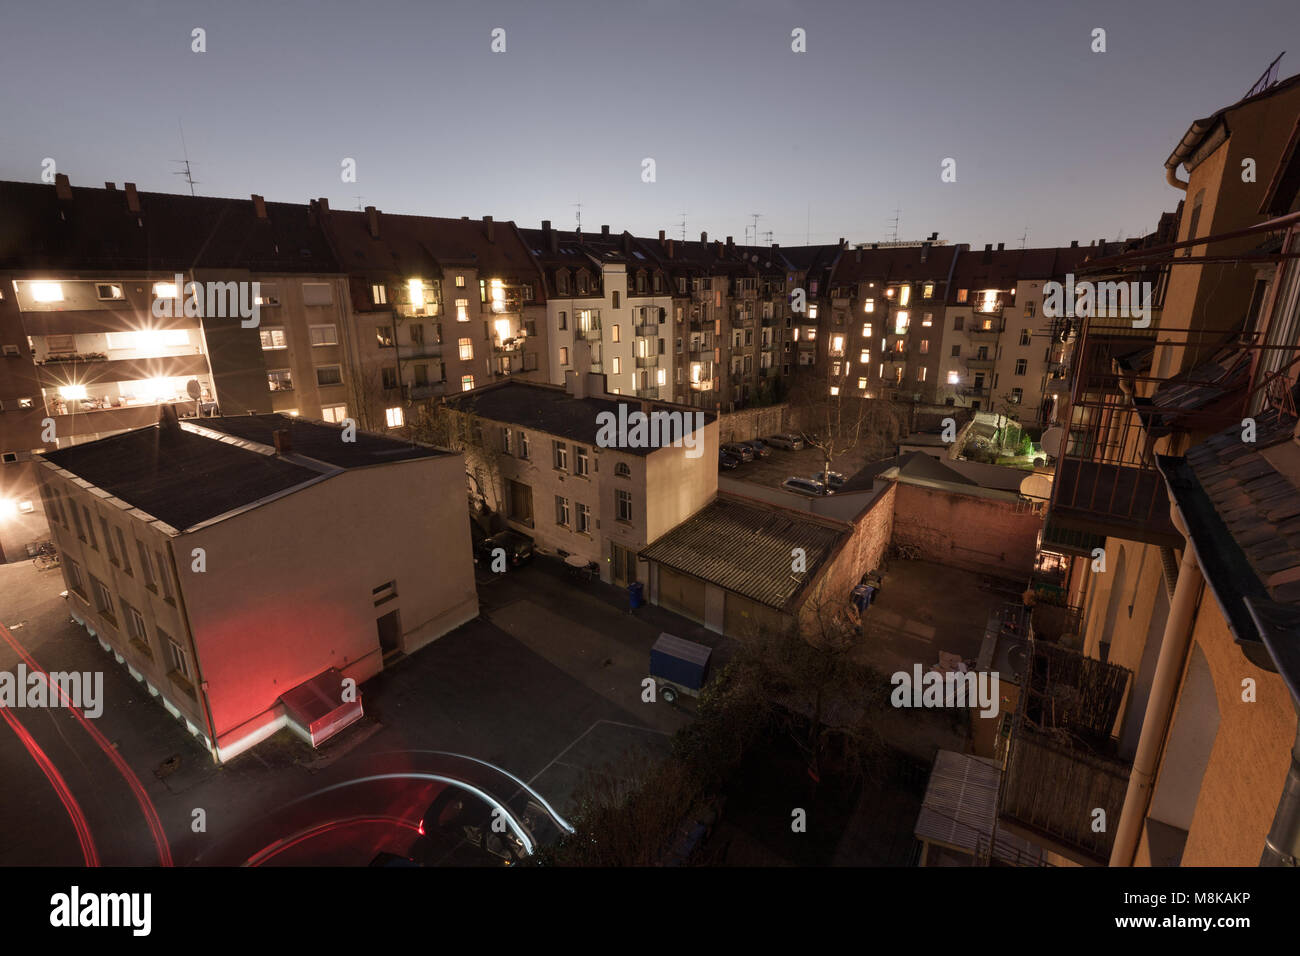 Backyard in Nuremberg (Nürnberg), Bavaria, Germany after sunset. The roofline of the tenement buildings is still back-lit by faint diffuse light. Stock Photo